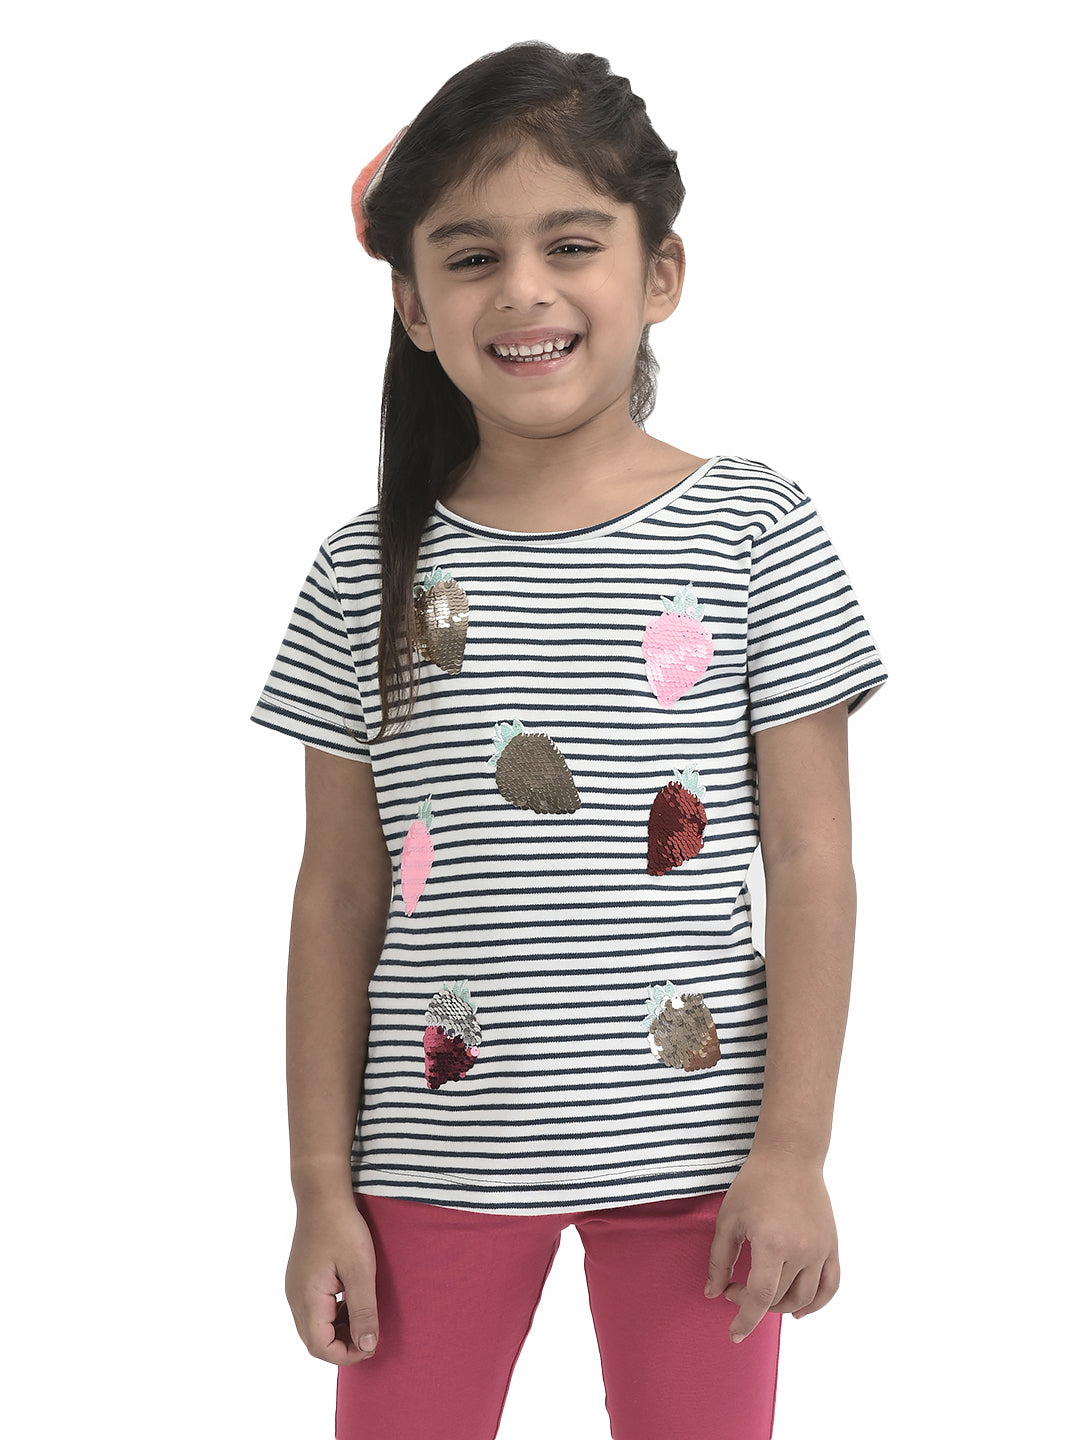 Girls Sequence All Over Strawberry Work Half sleeve Bio-Washed T-Shirt - Pink & Blue